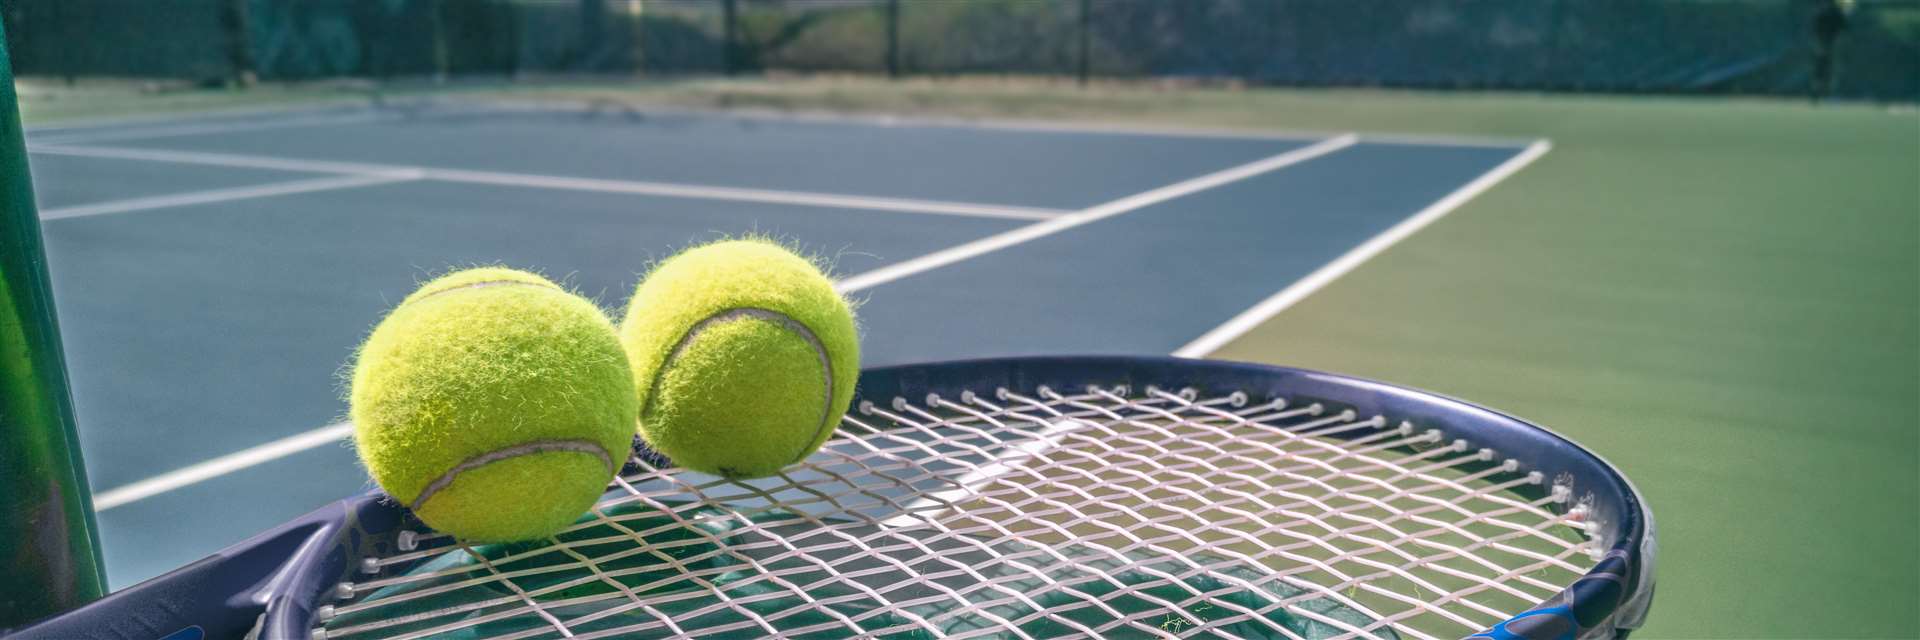 As a non contact sport, teenagers will be allowed to play tennis next month.